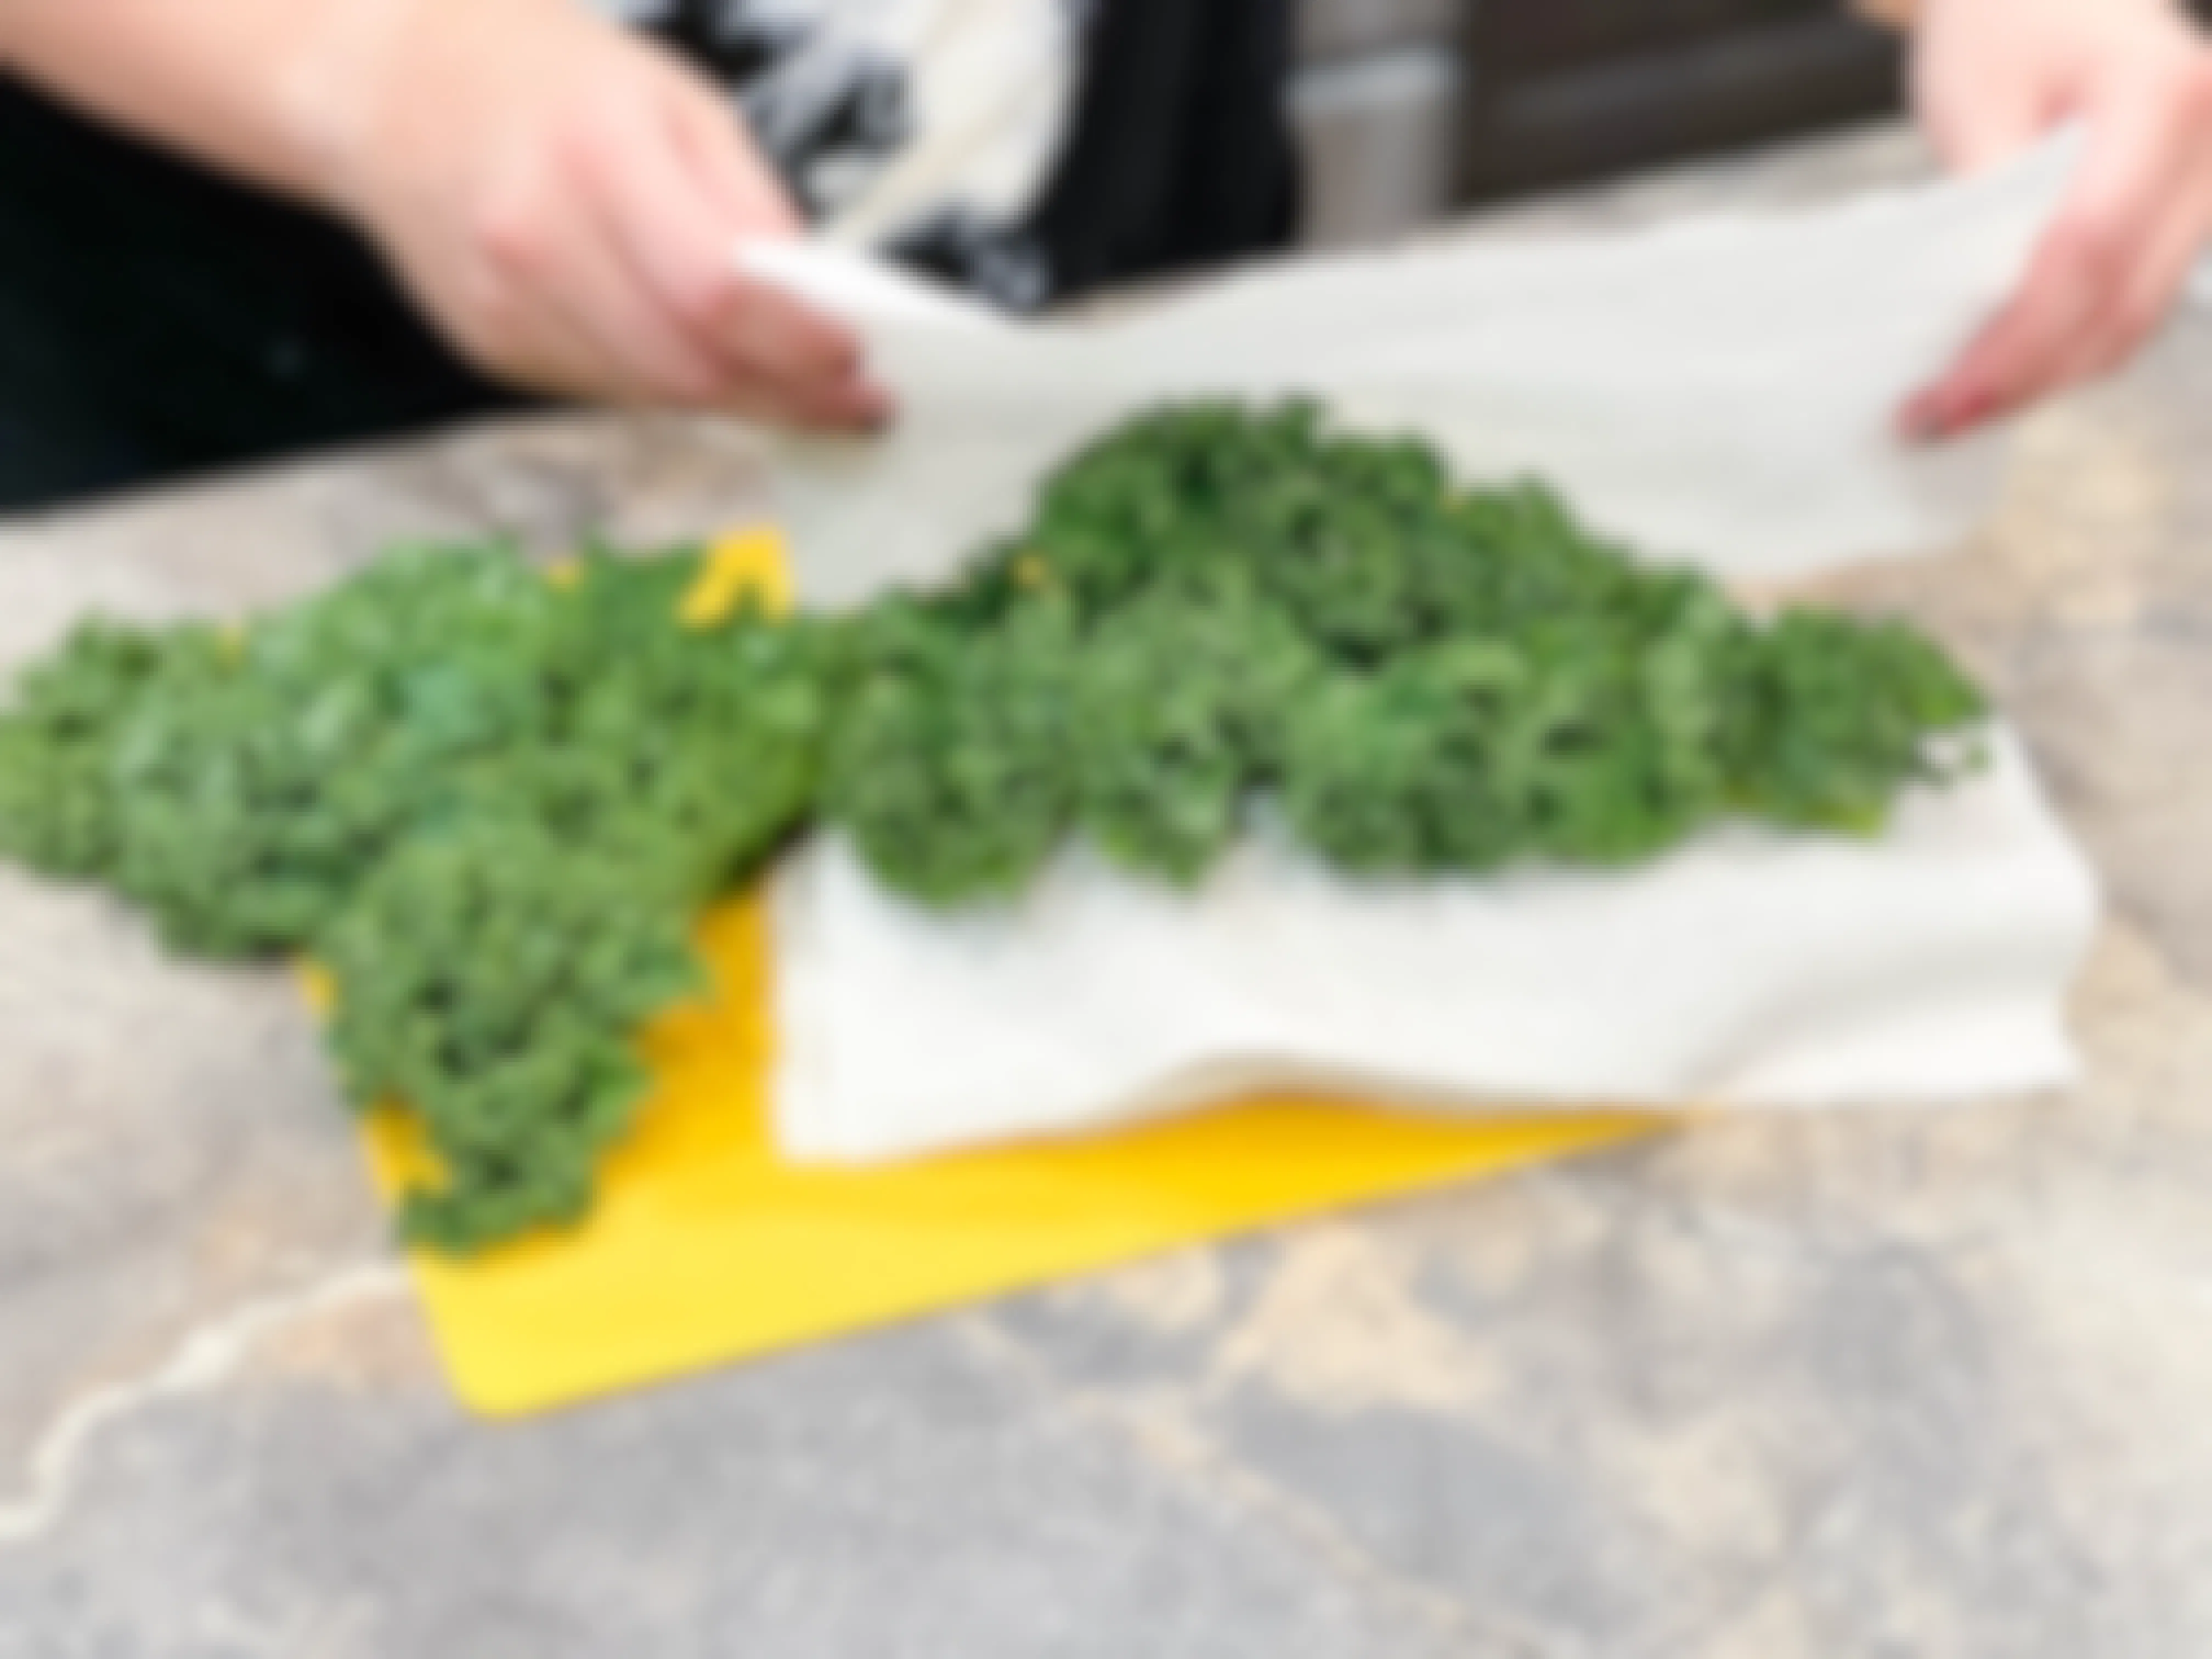 kale being separated with paper towel